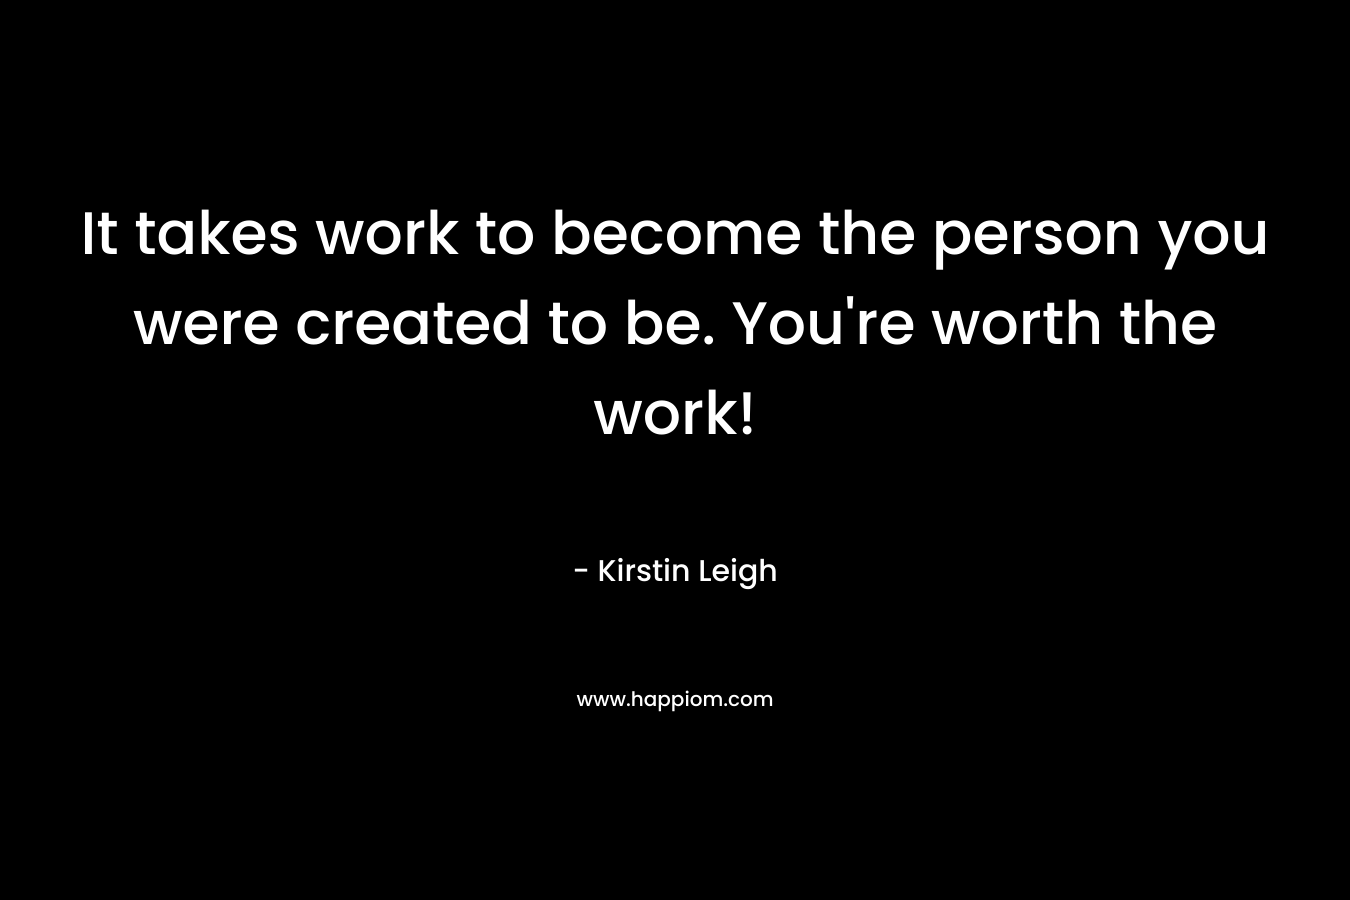 It takes work to become the person you were created to be. You're worth the work!